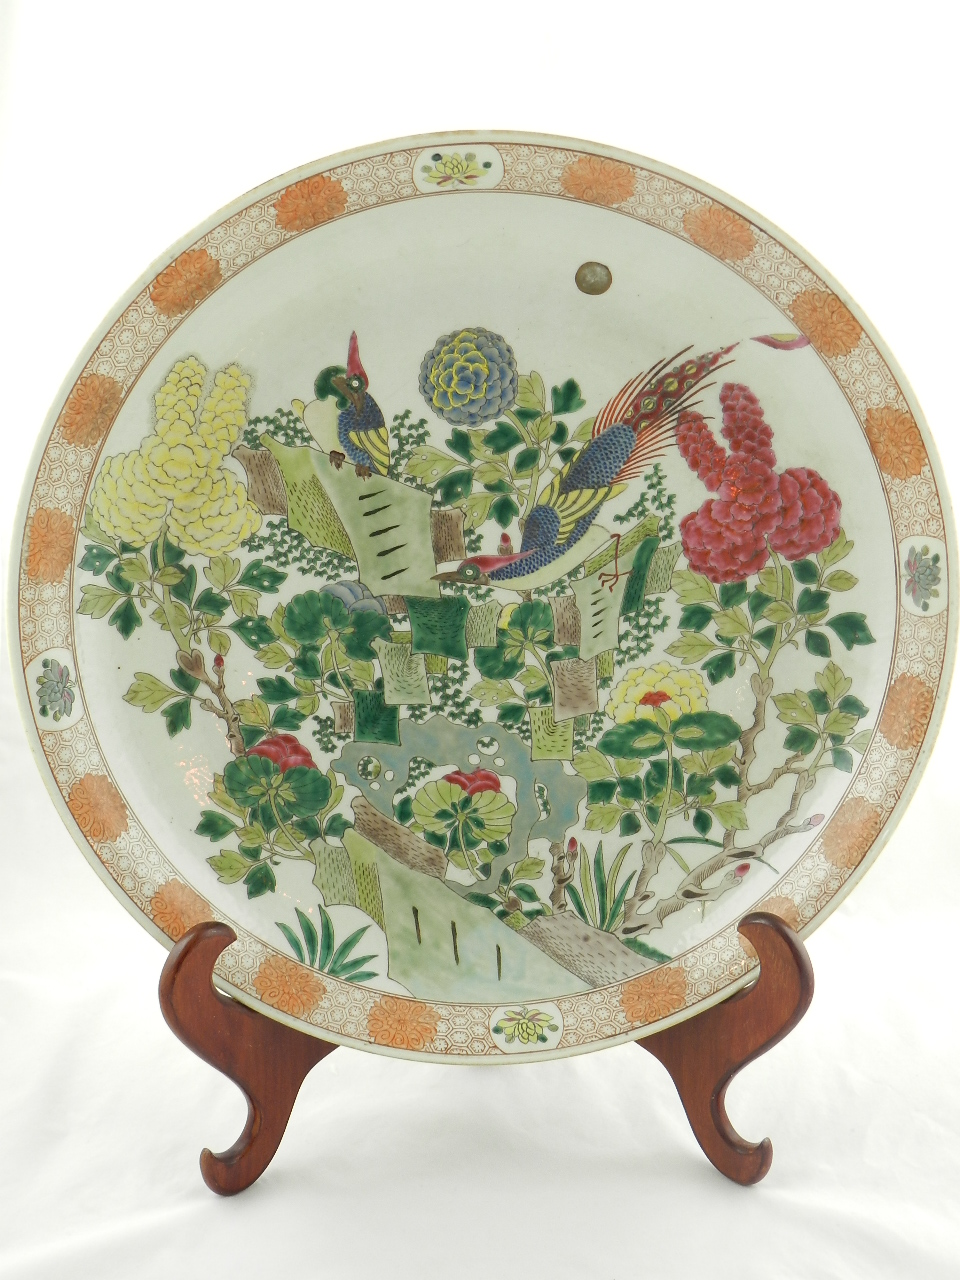 A large Chinese porcelain charger enamel decorated with stylized bird in tree designs on a cream